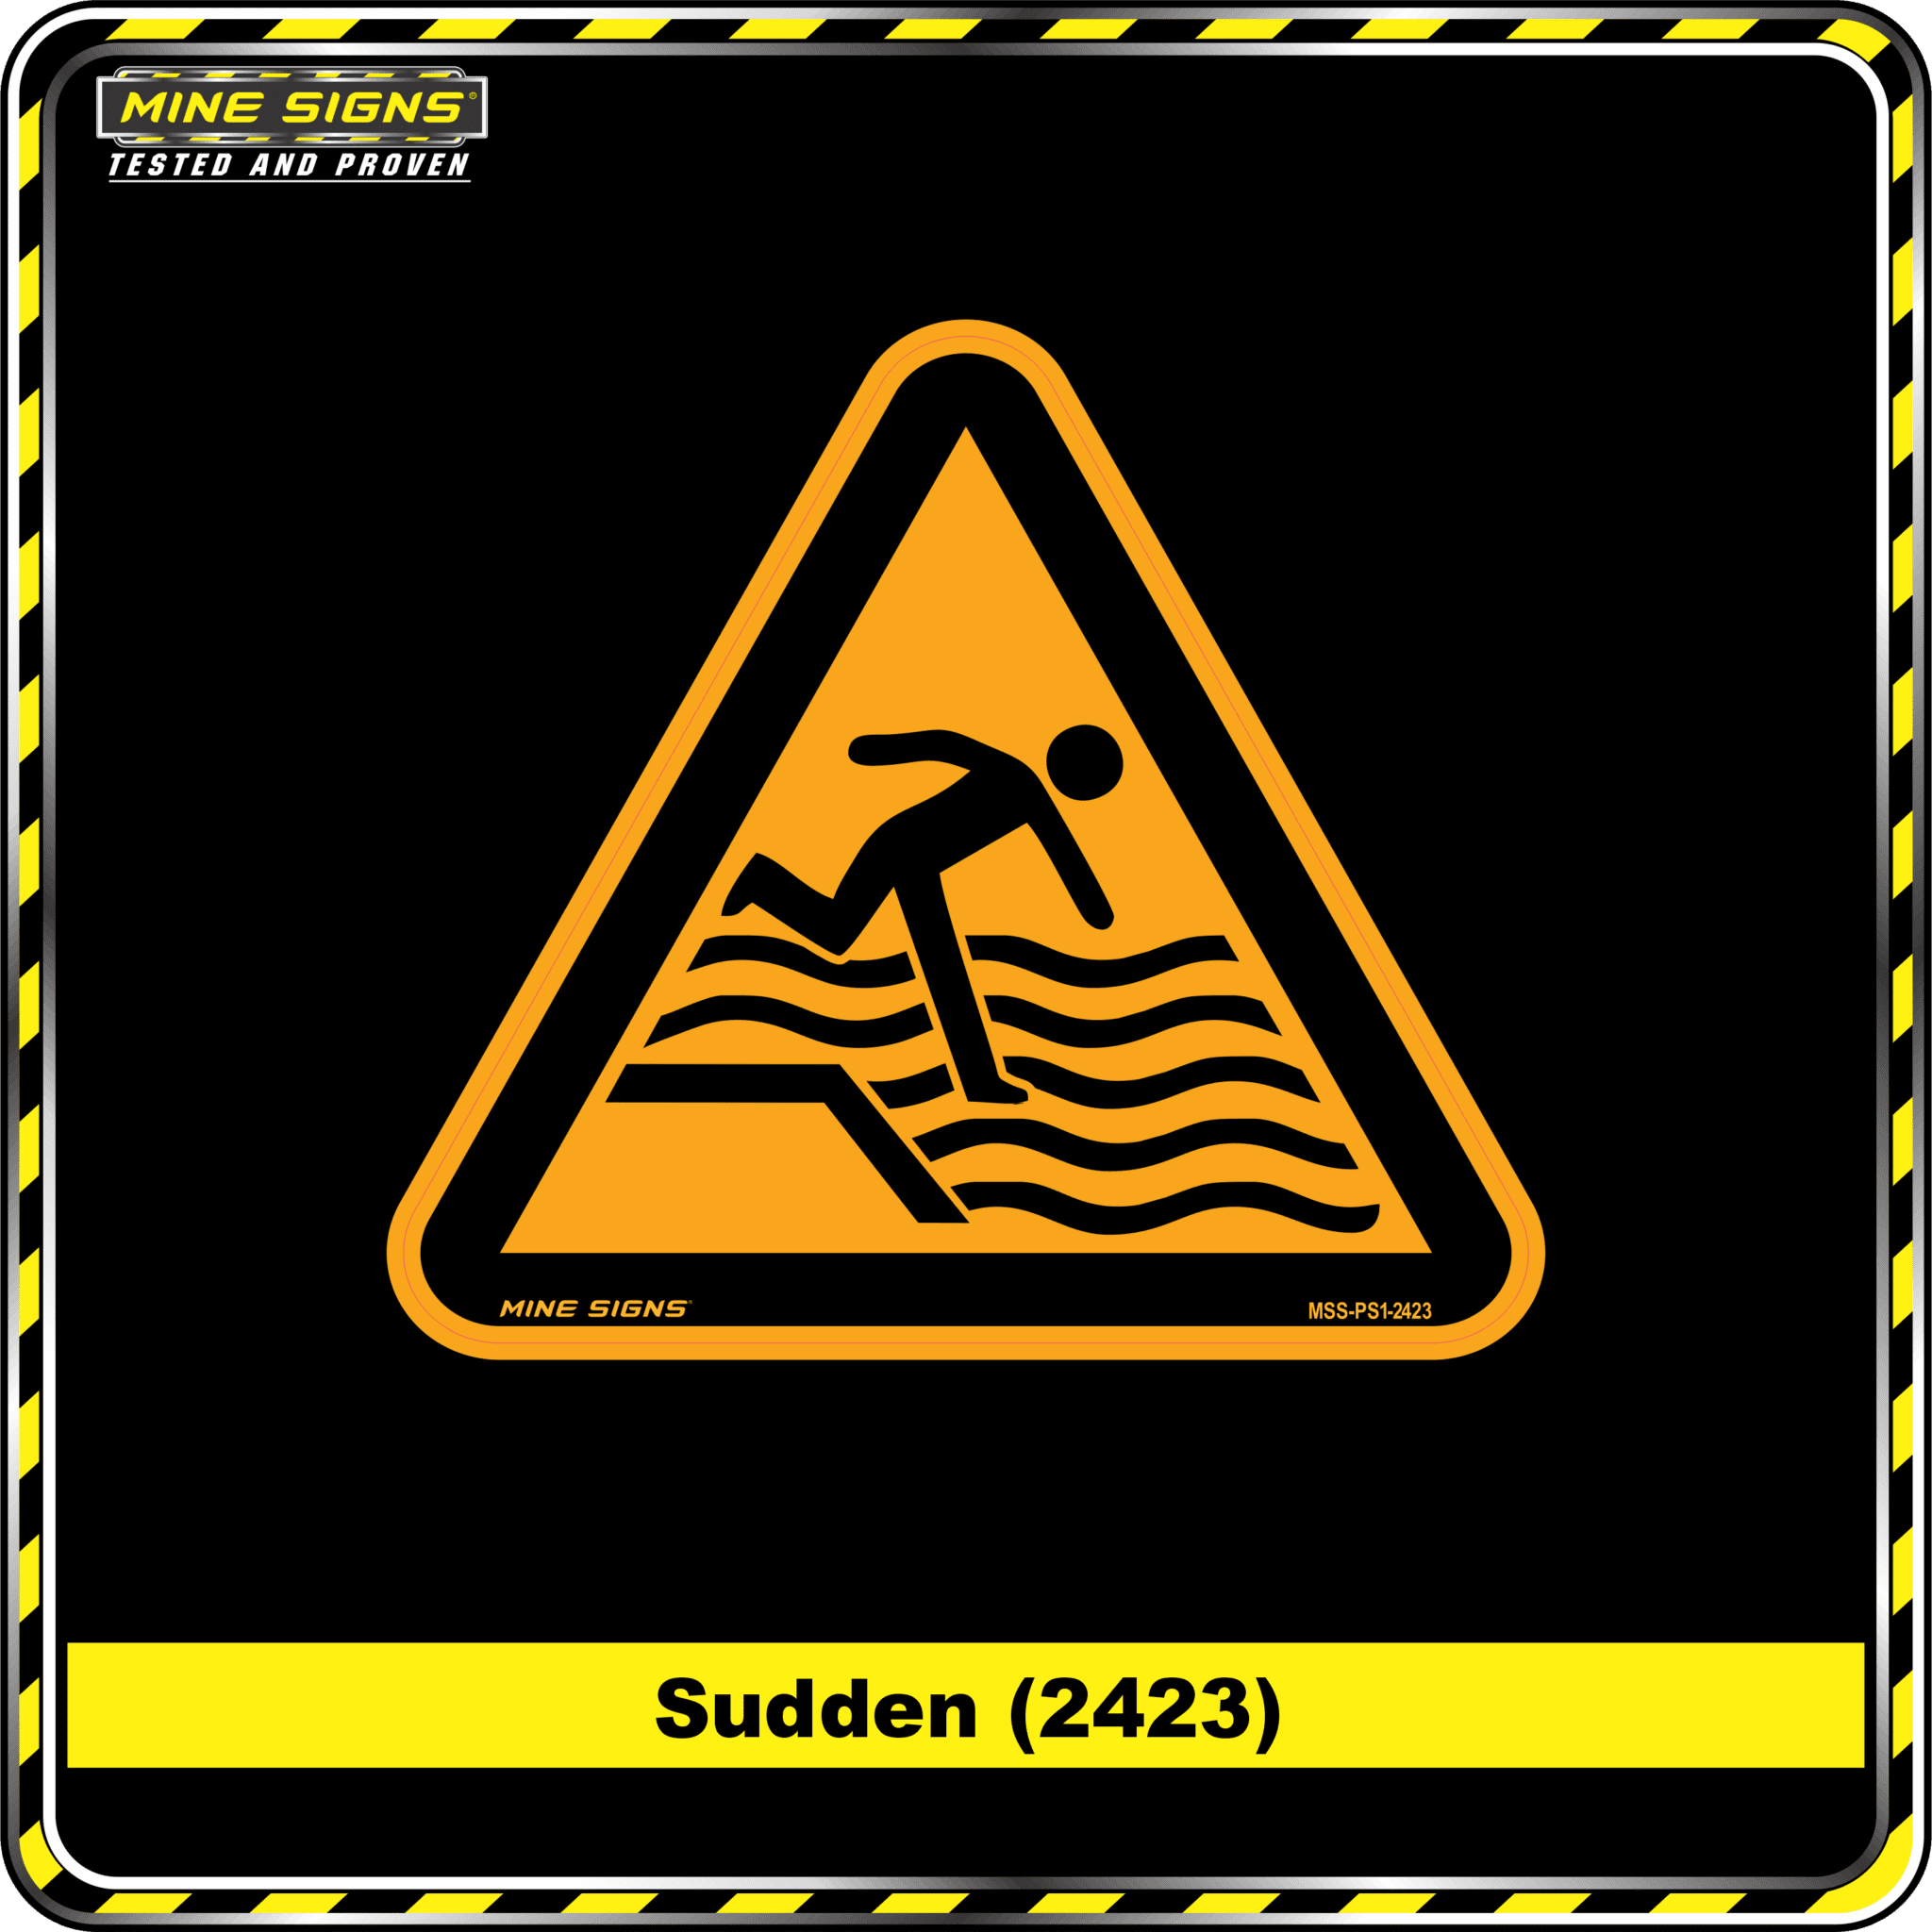 MS - Product Background - Safety Signs - Sudden 2423